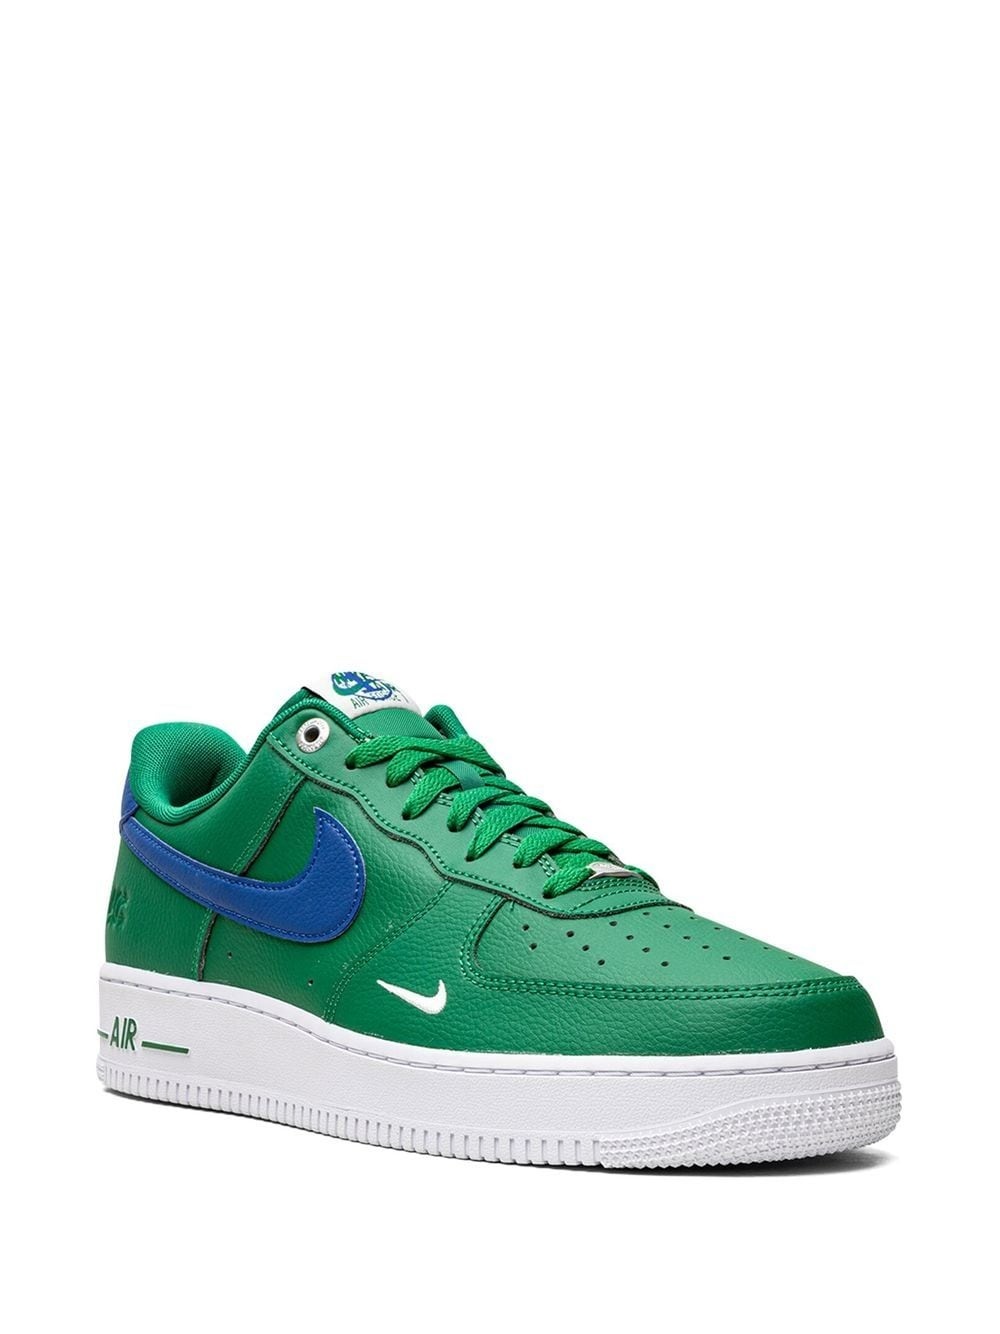 Air Force 1 Low "Malachite - Green" sneakers - 2